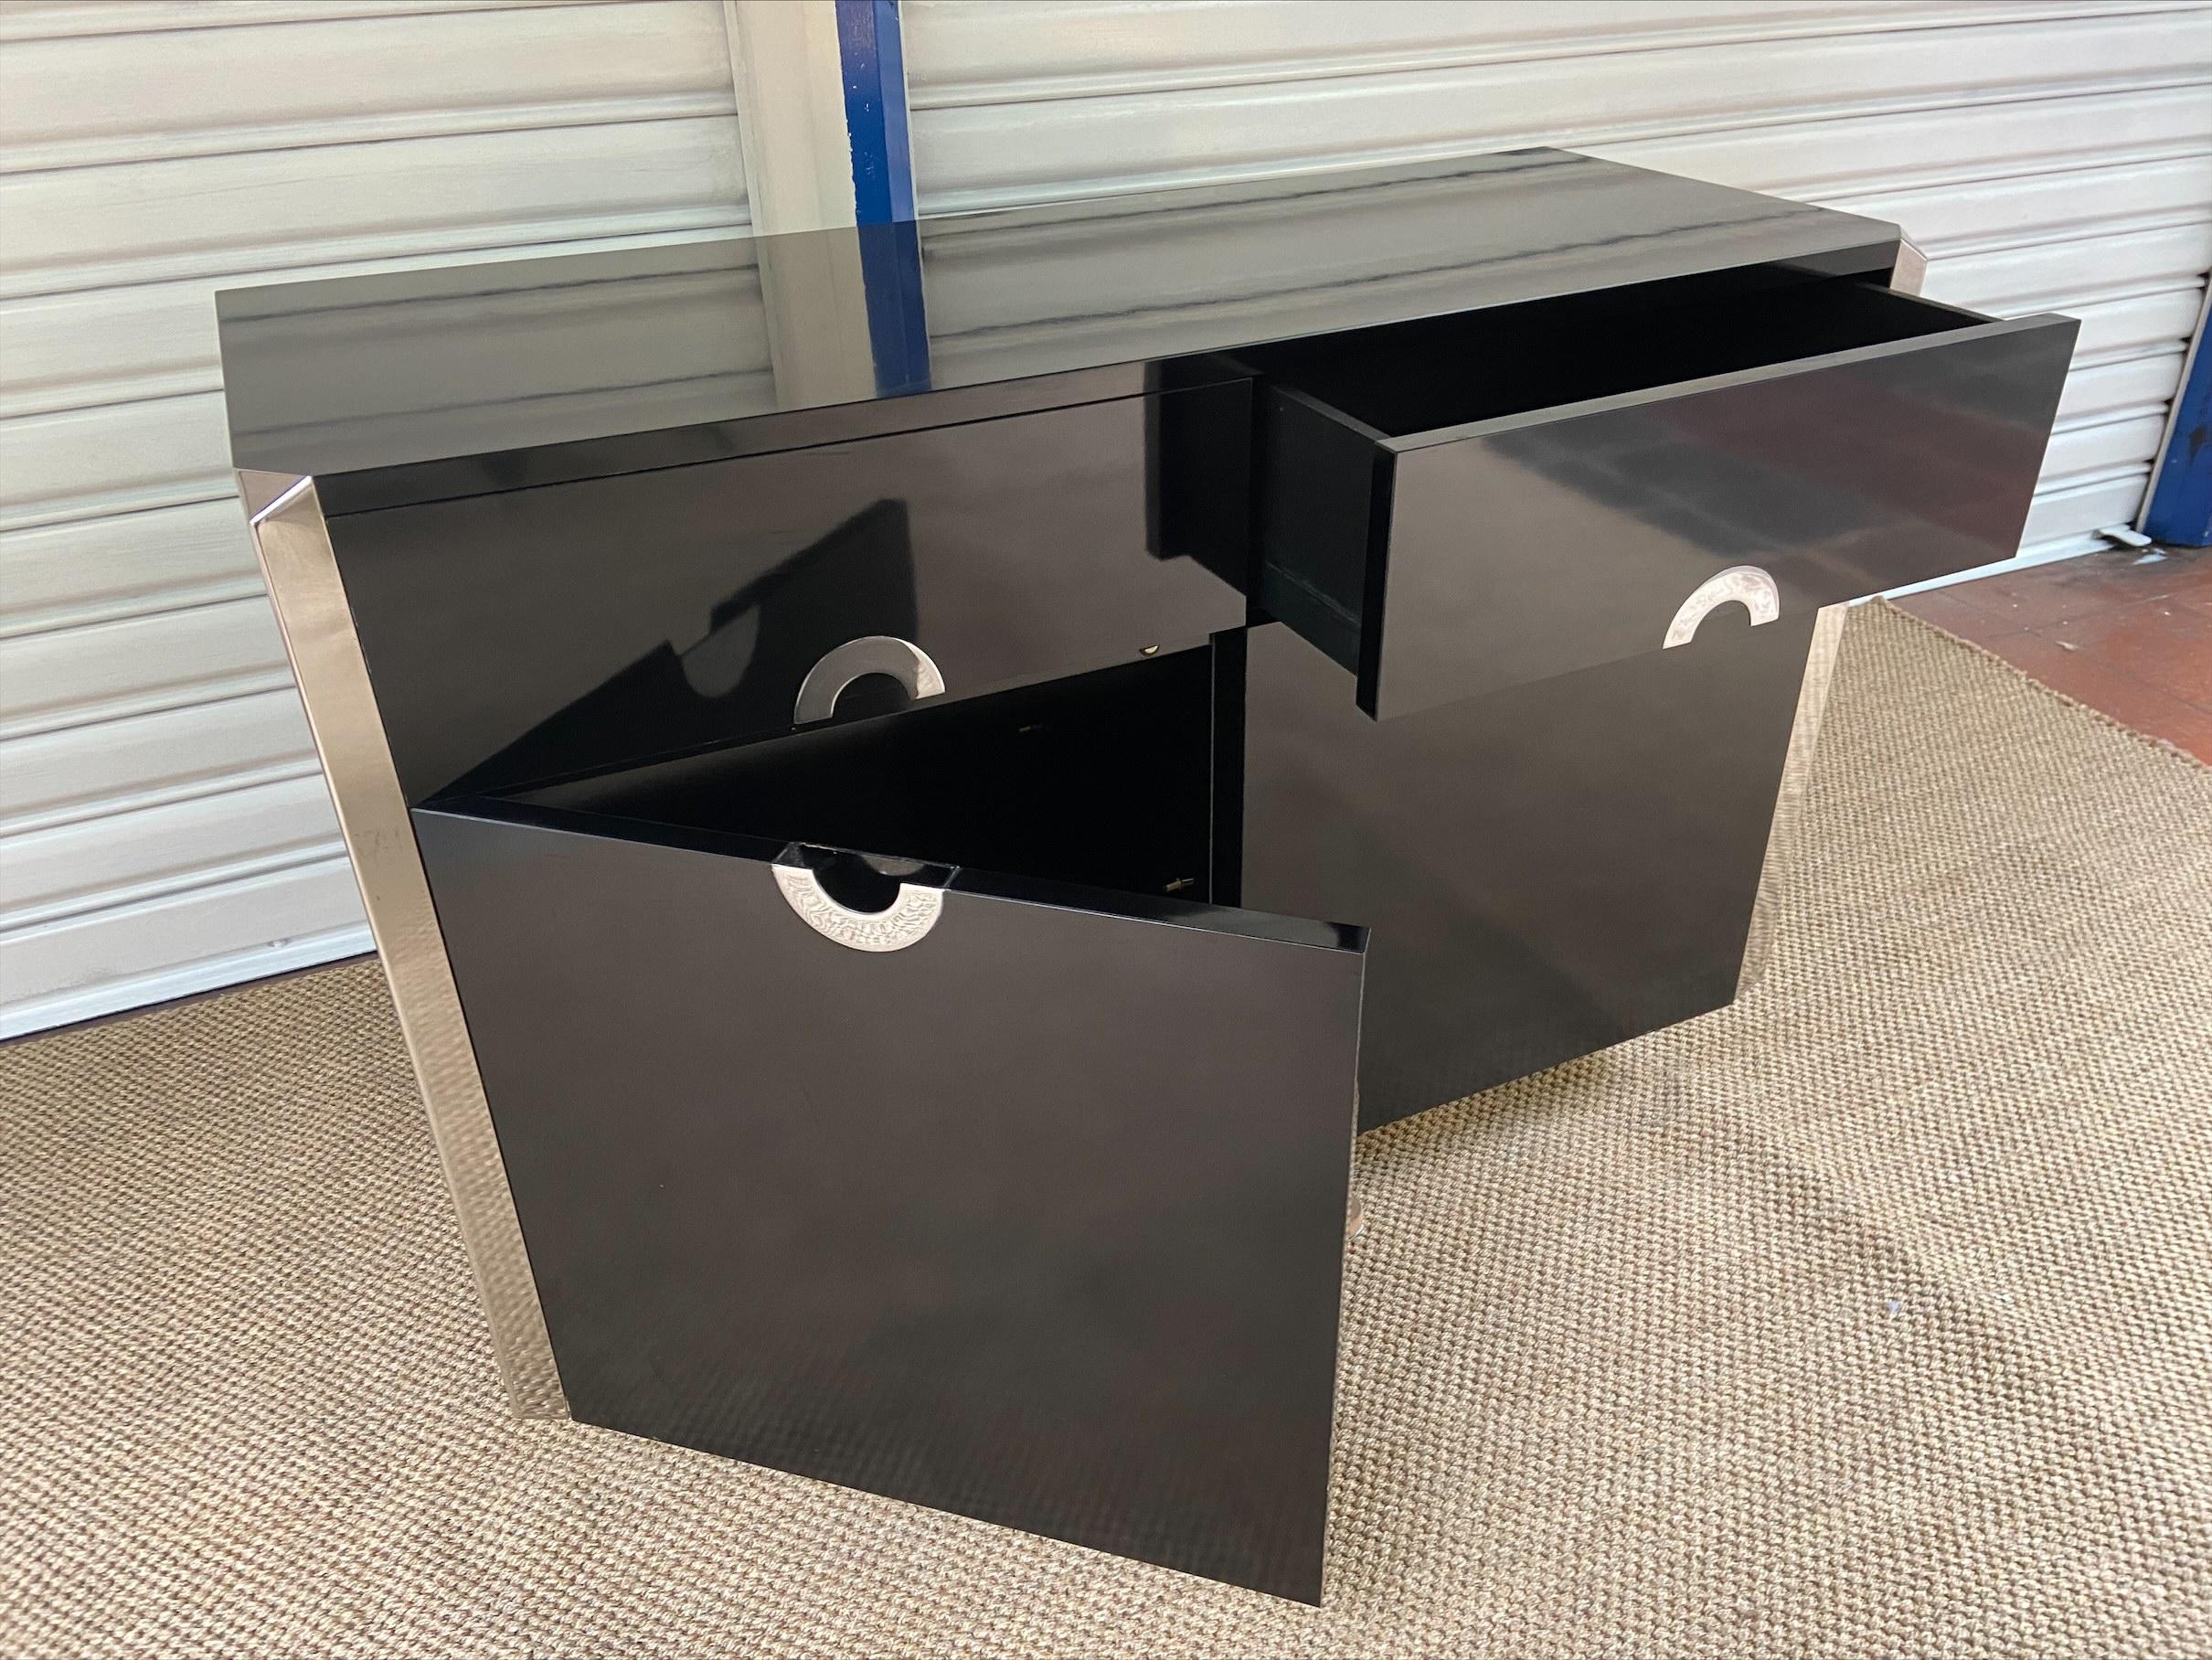 Sideboard - Willy Rizzo for Pierre Cardin
Circa 1970
Black lacquered wood
Brushed steel finish: corners and handles.
Two drawers and two doors with interior shelf
H78 x W118 x D47.5 cm.

   